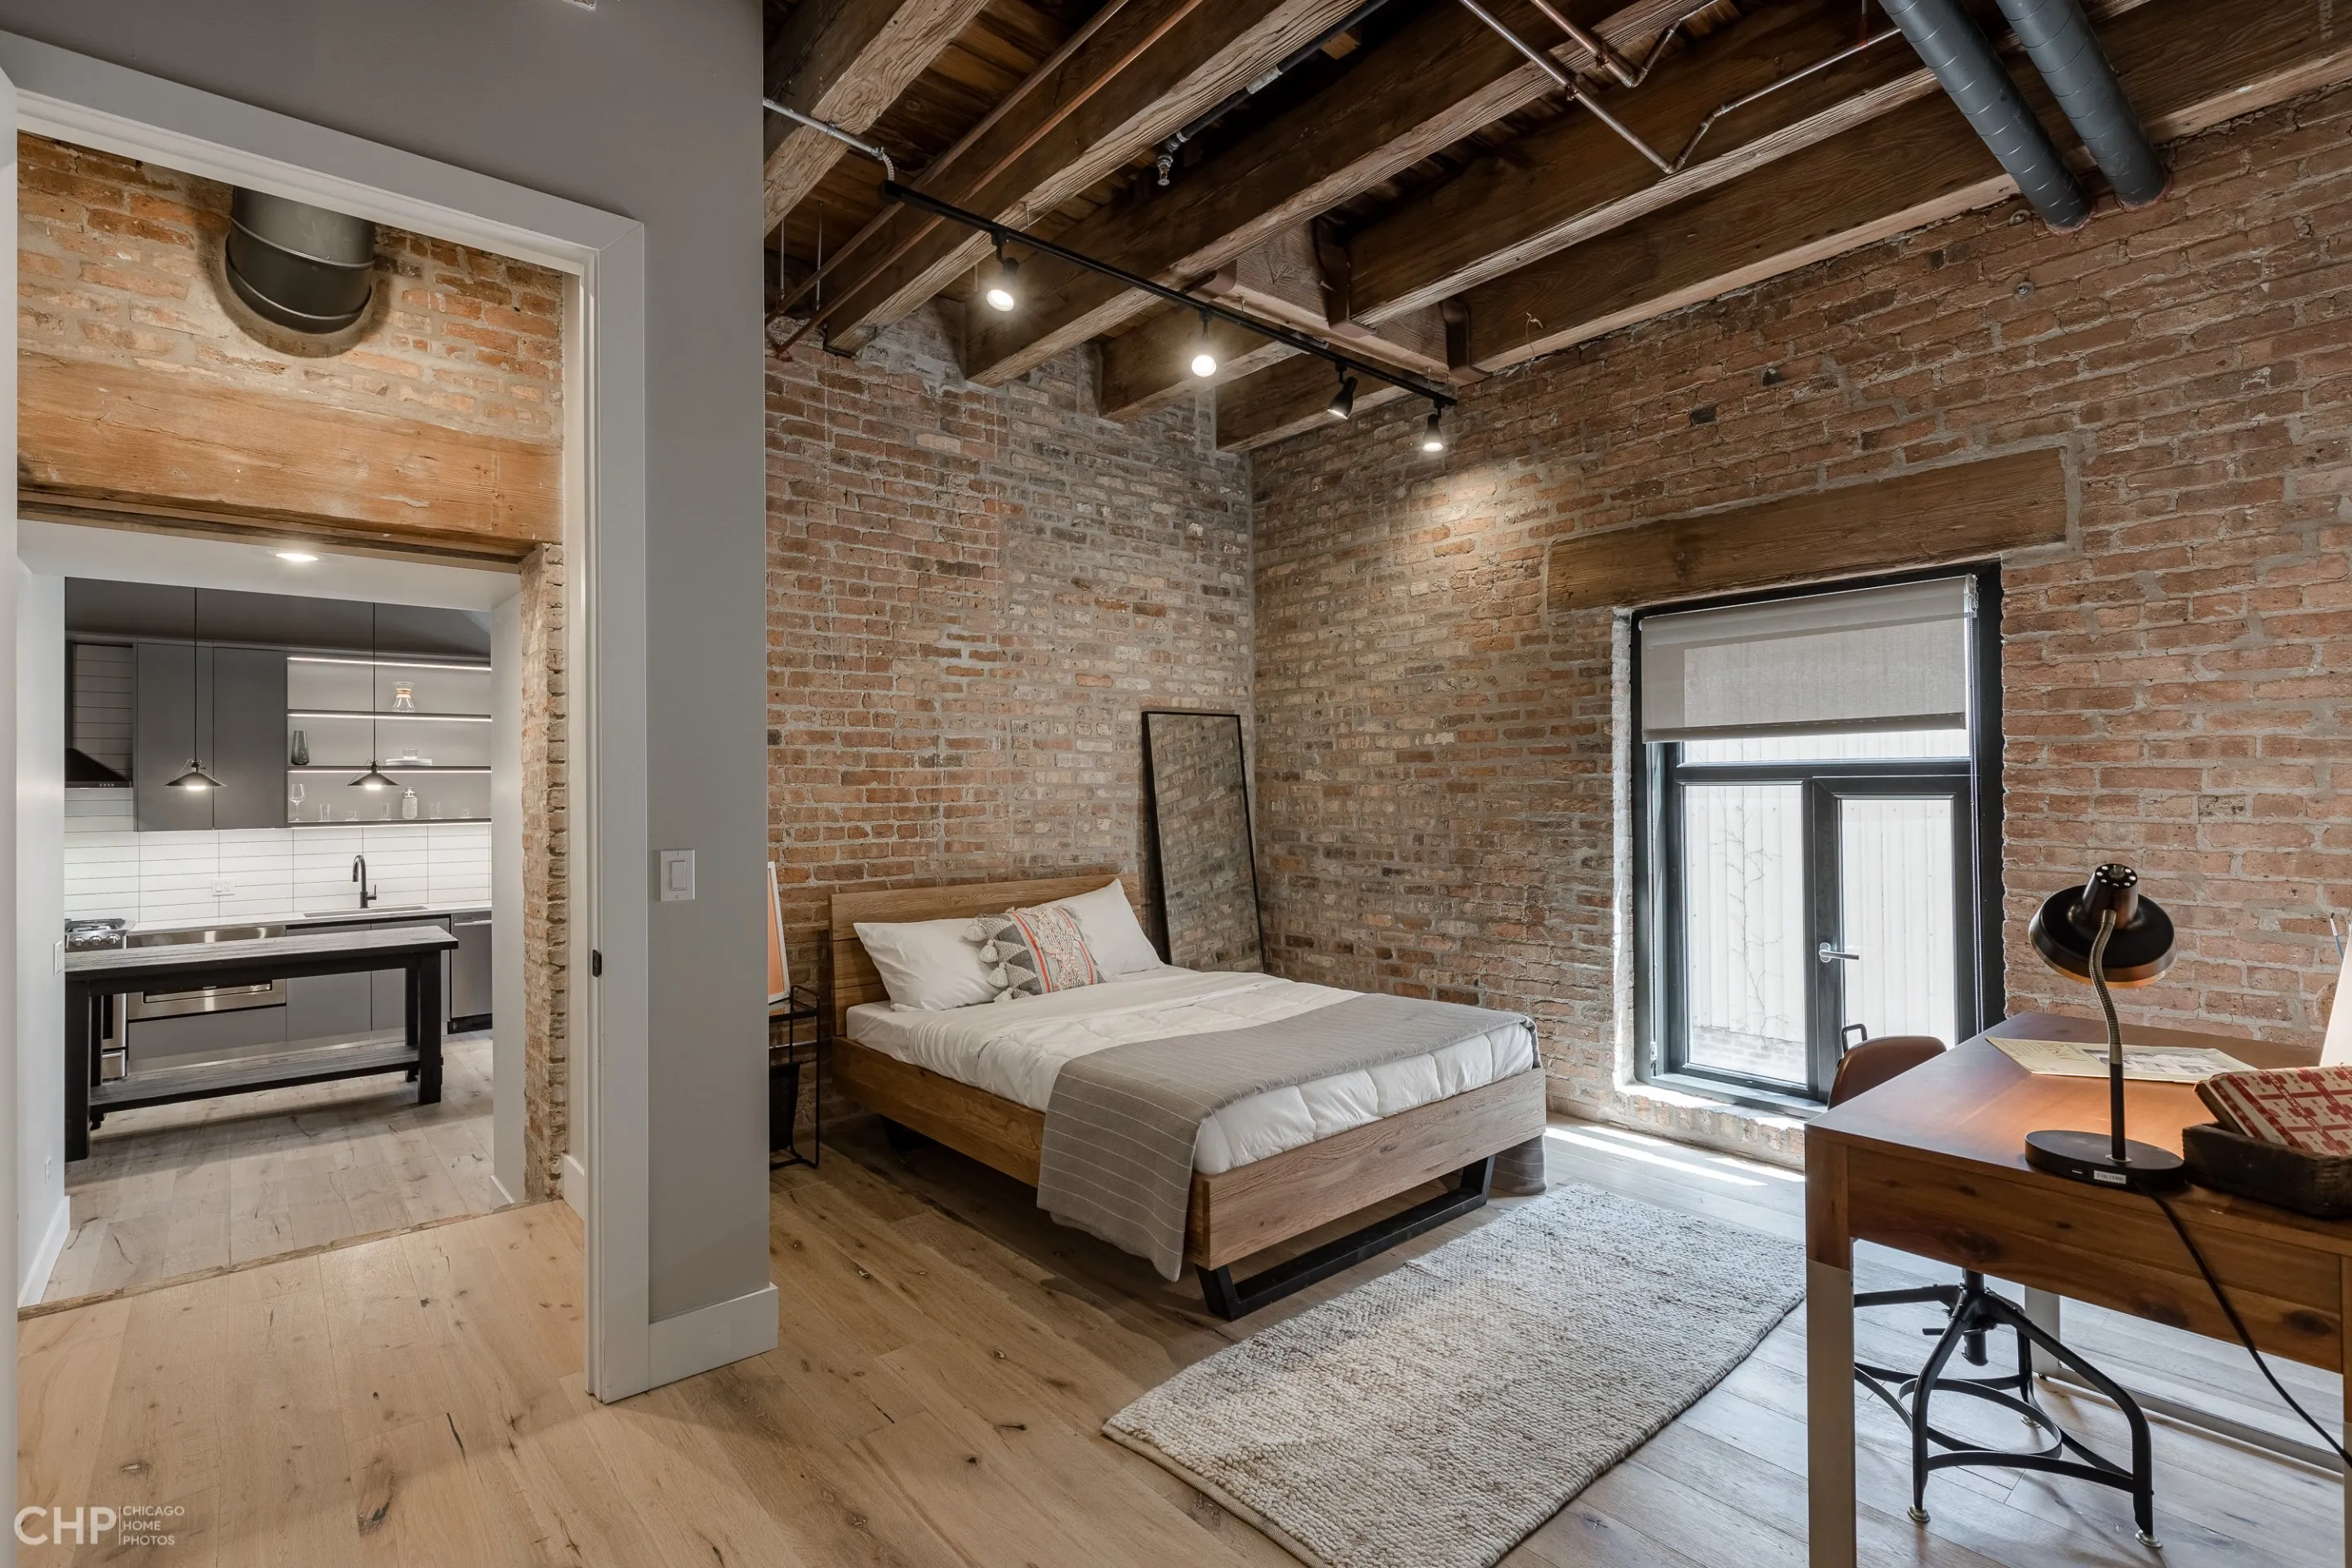 Loft Apartments For Rent In Chicago